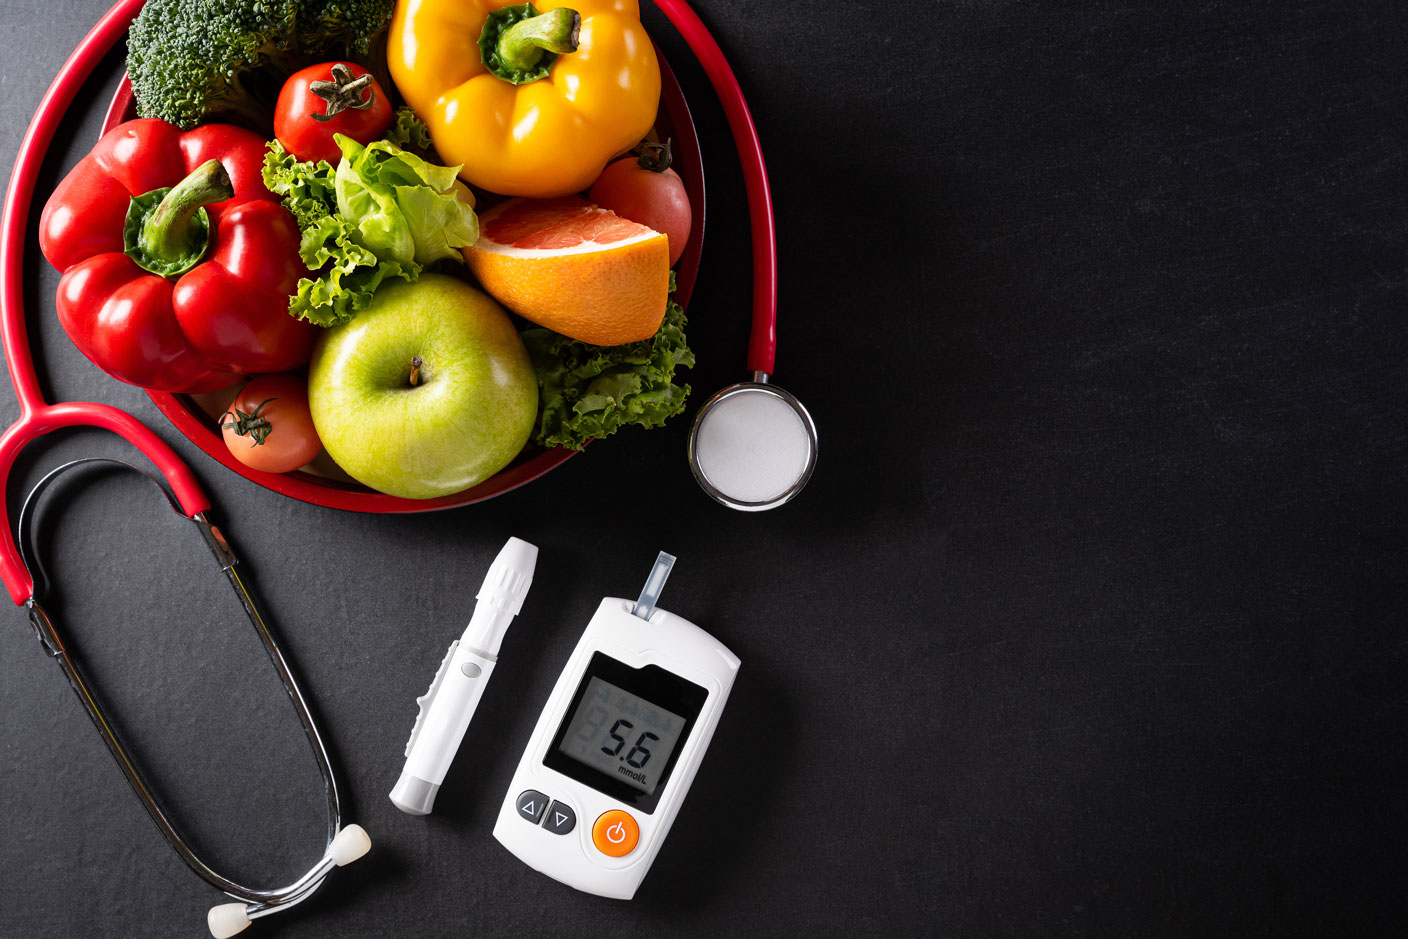 Podcast: Carbohydrate Restriction in Type 1 Diabetes